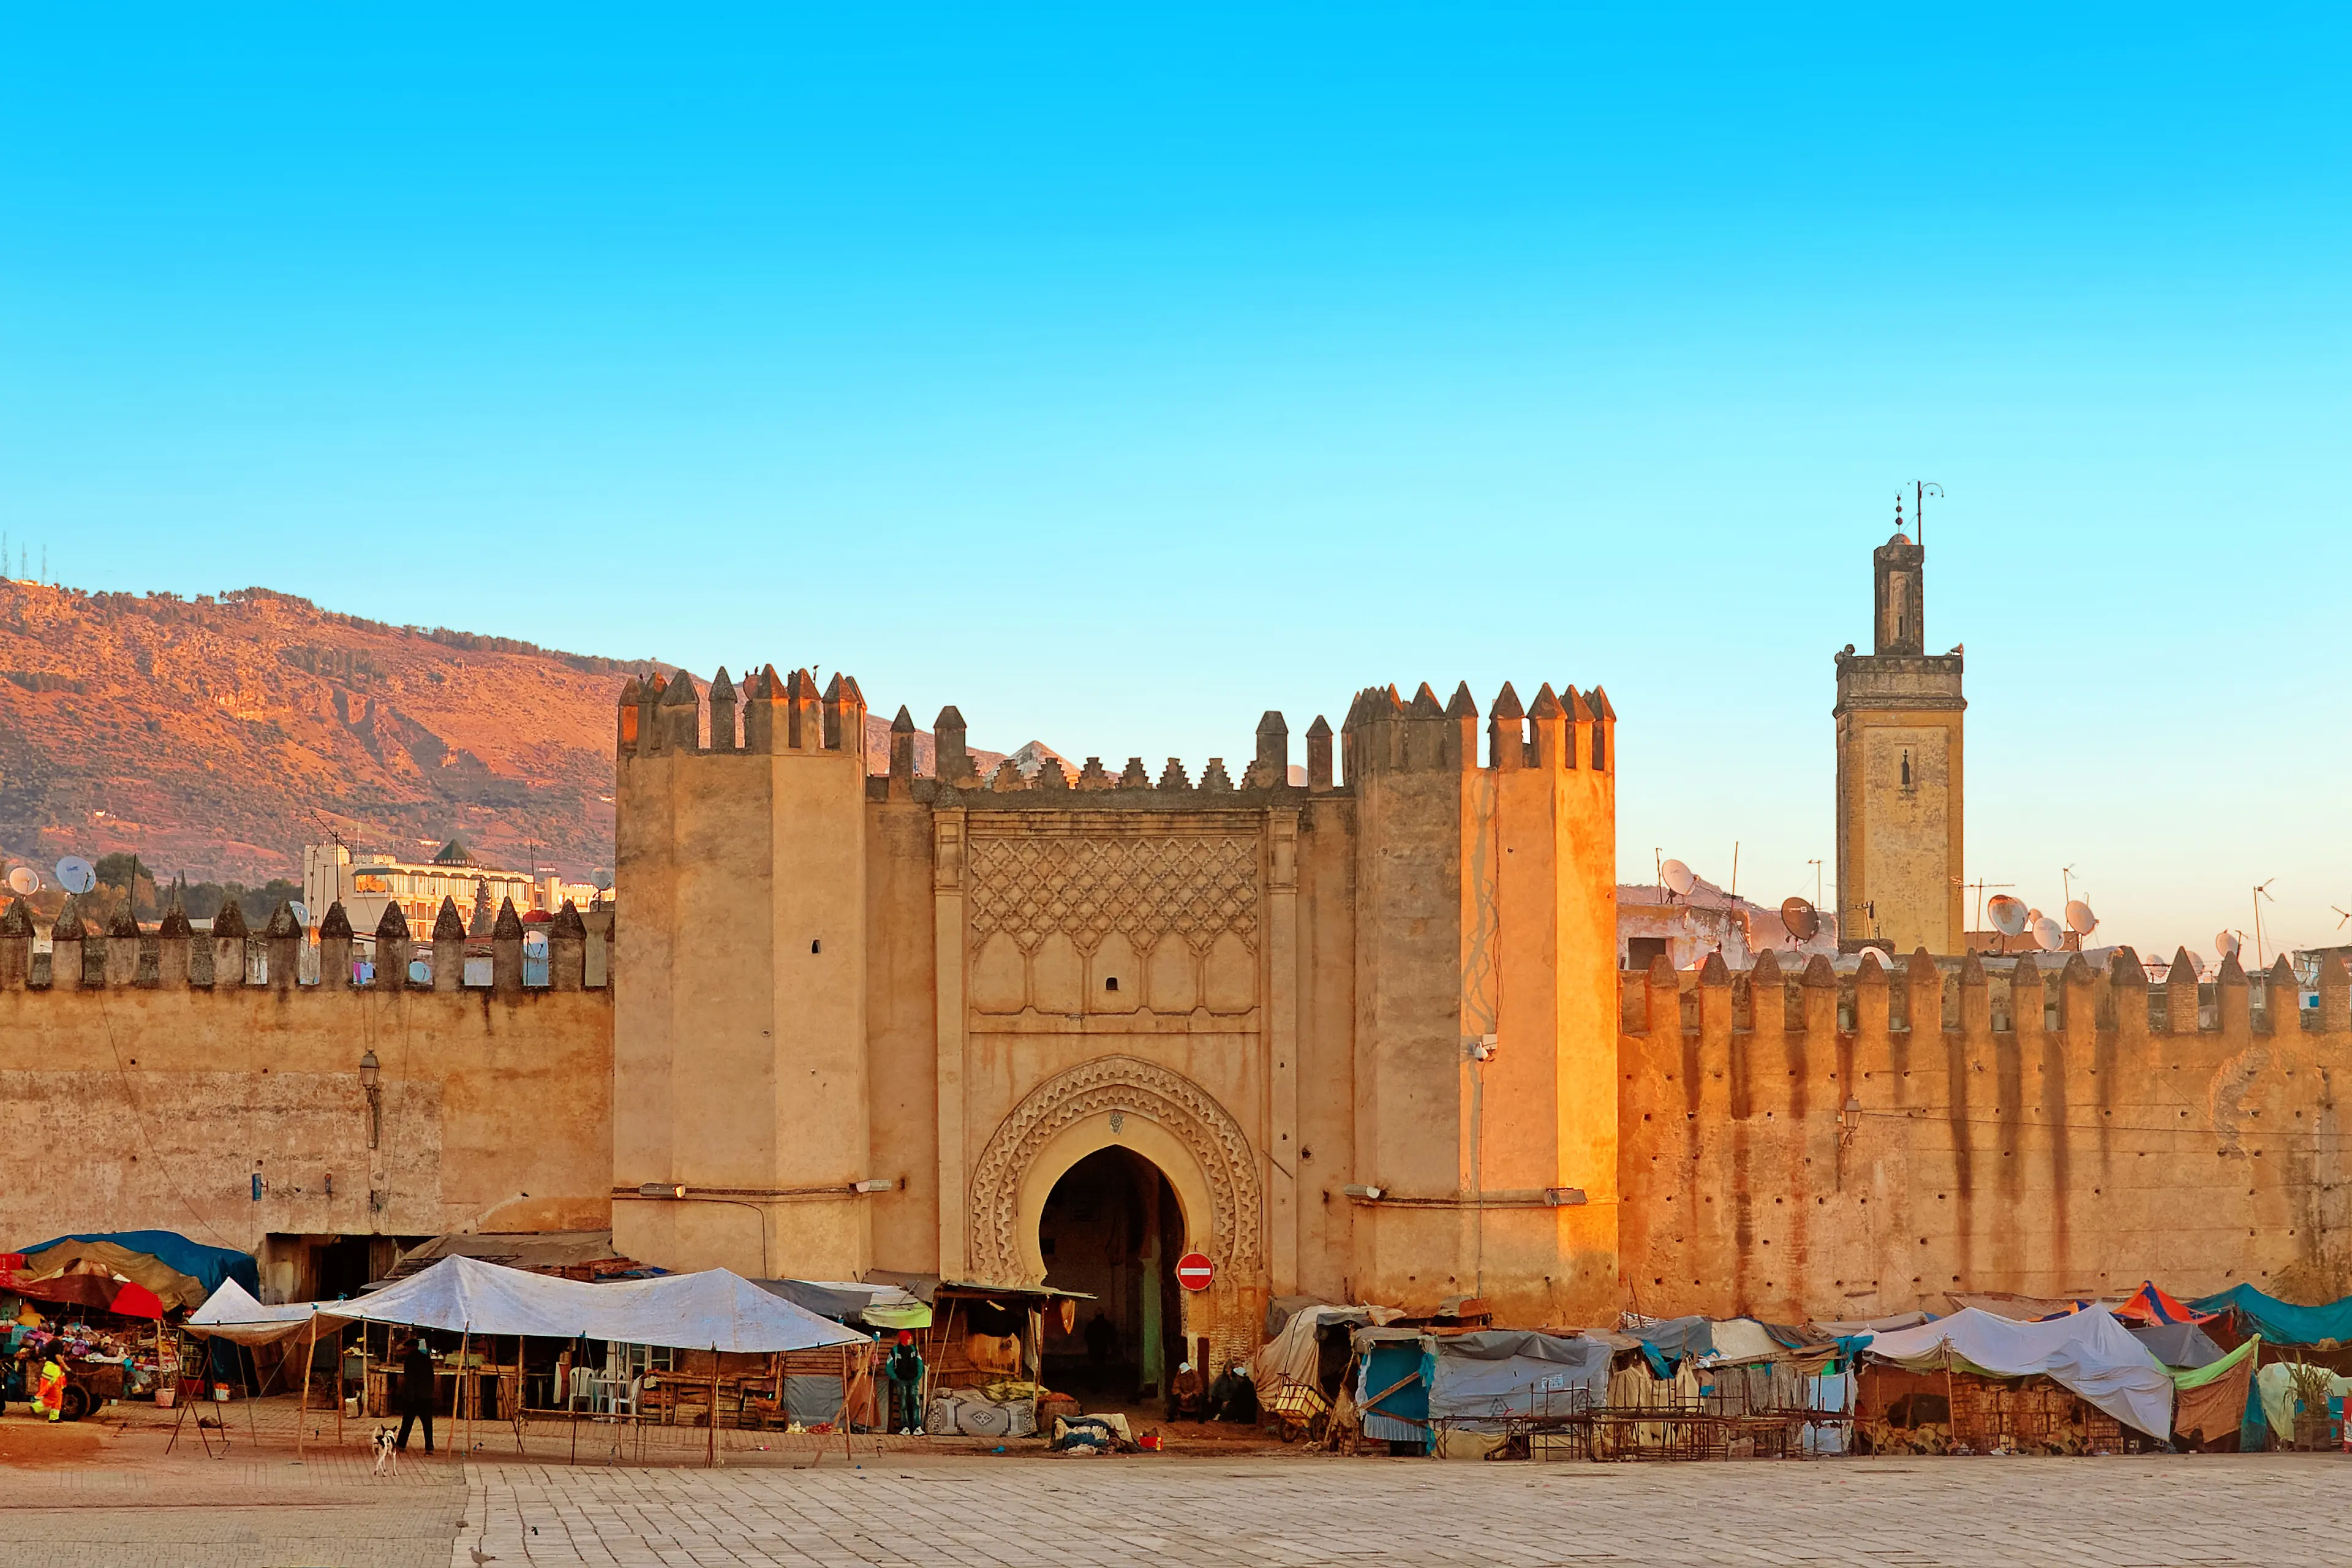 1-Day Gourmet Adventure with Friends in Fez, Morocco